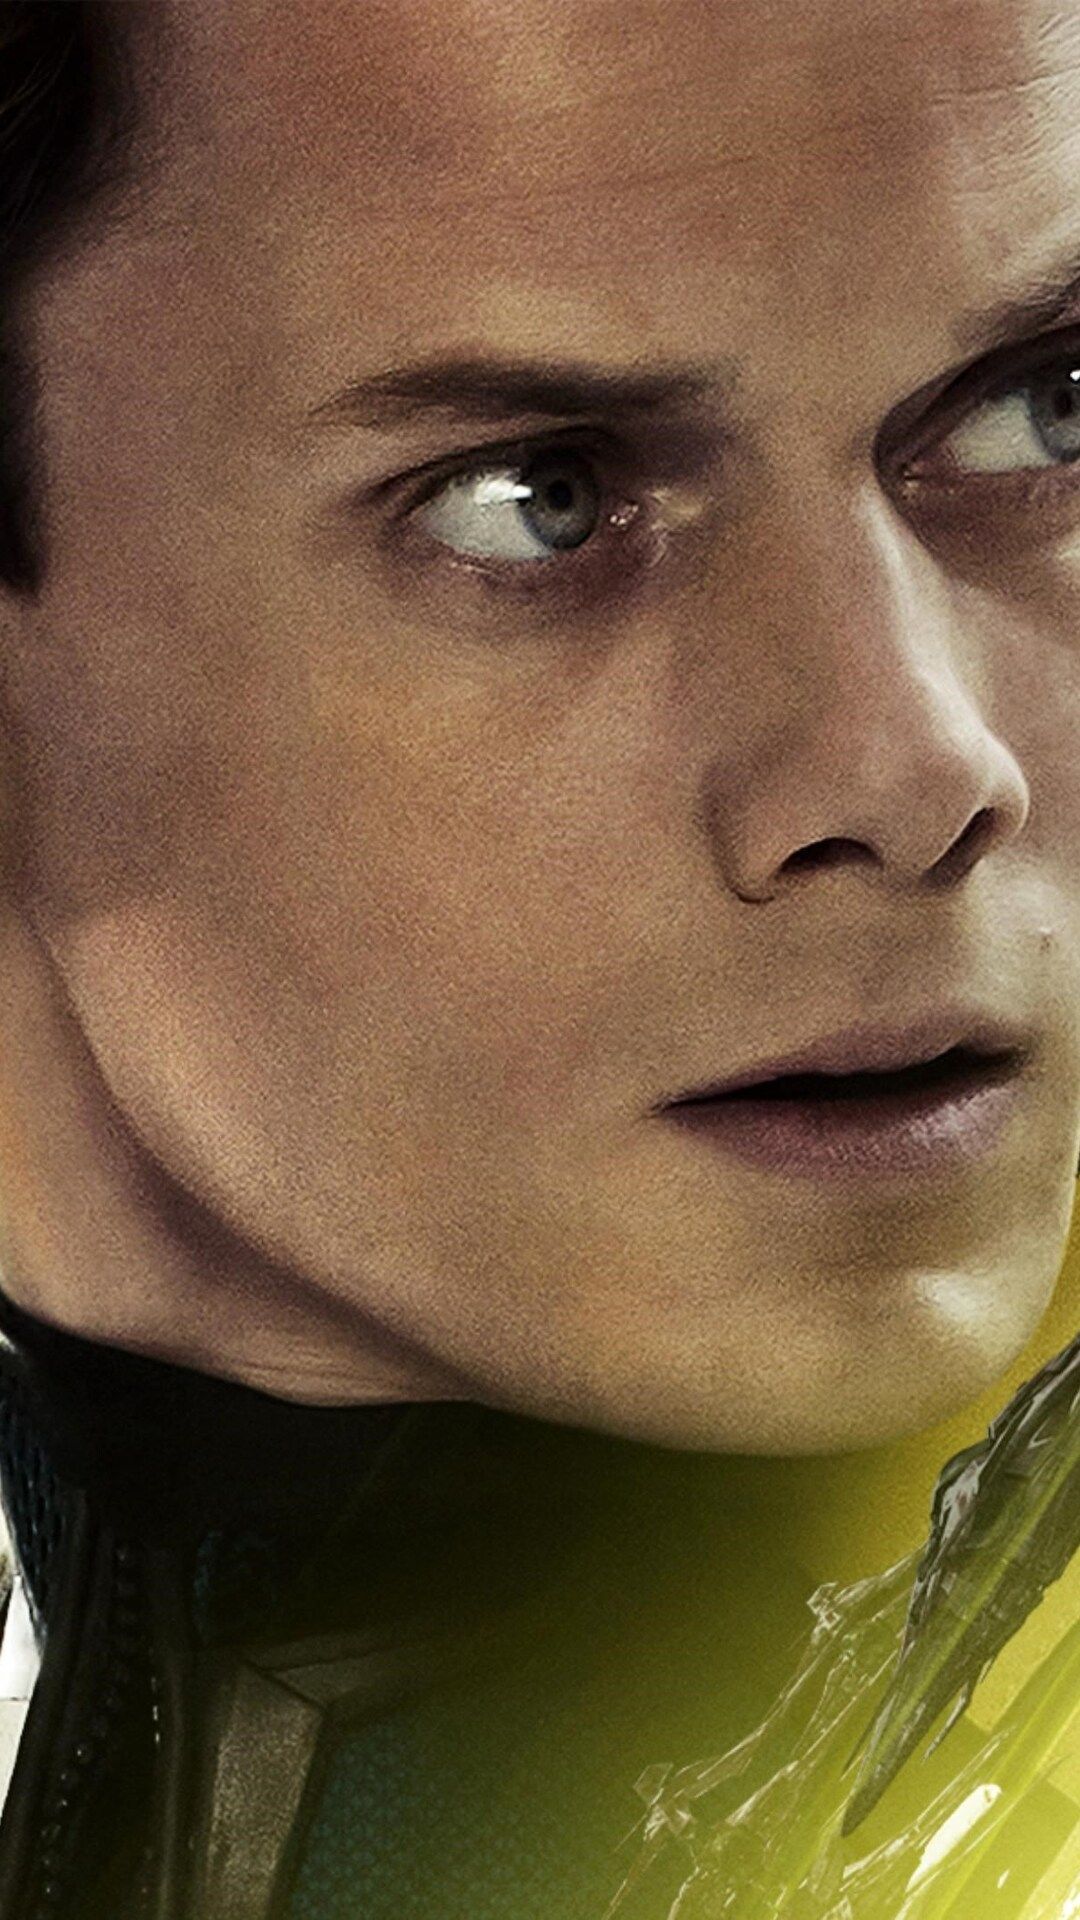 Chekov Star Trek Beyond iPhone 6s, 6 Plus, Pixel xl , One Plus 3t, 5 HD 4k Wallpaper, Image, Background, Photo and Picture